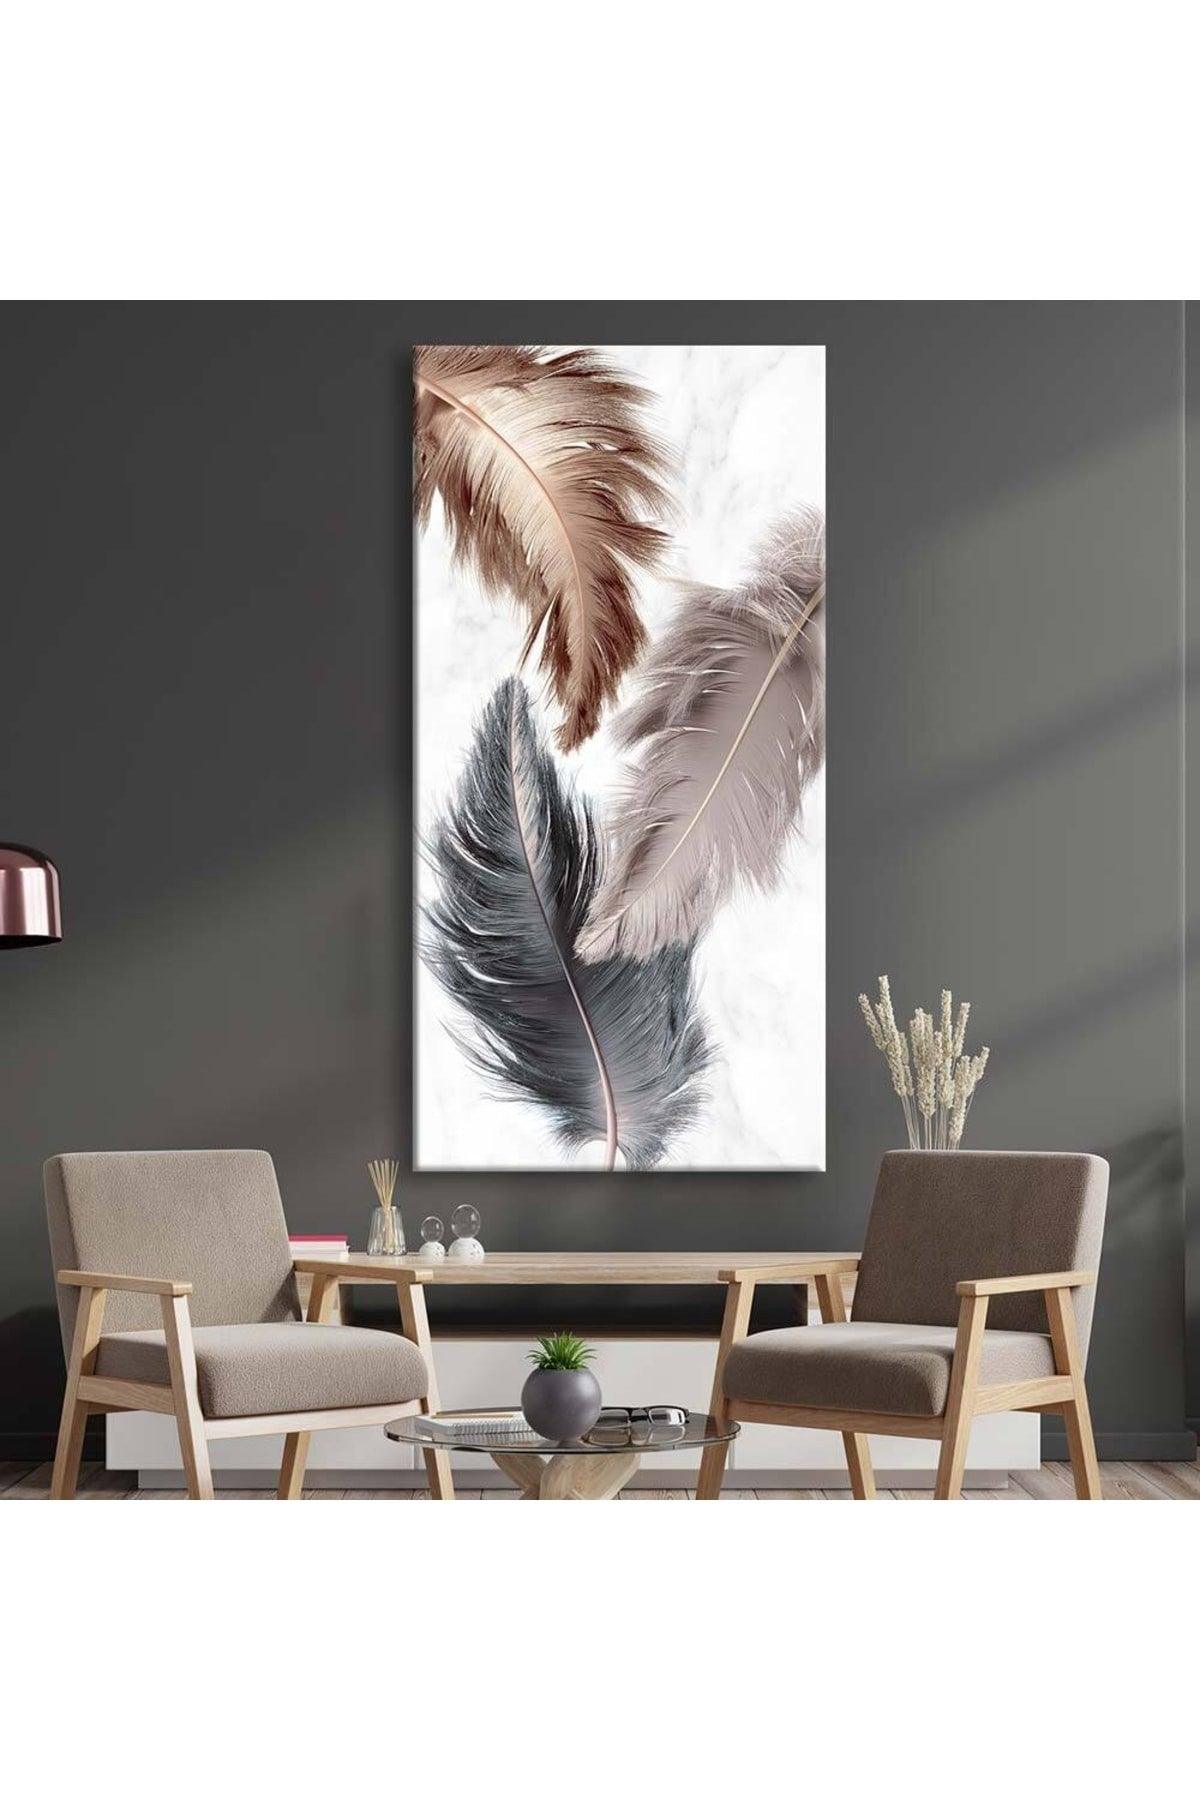 Decorative Feathers Canvas Painting - Voov2140 - Swordslife